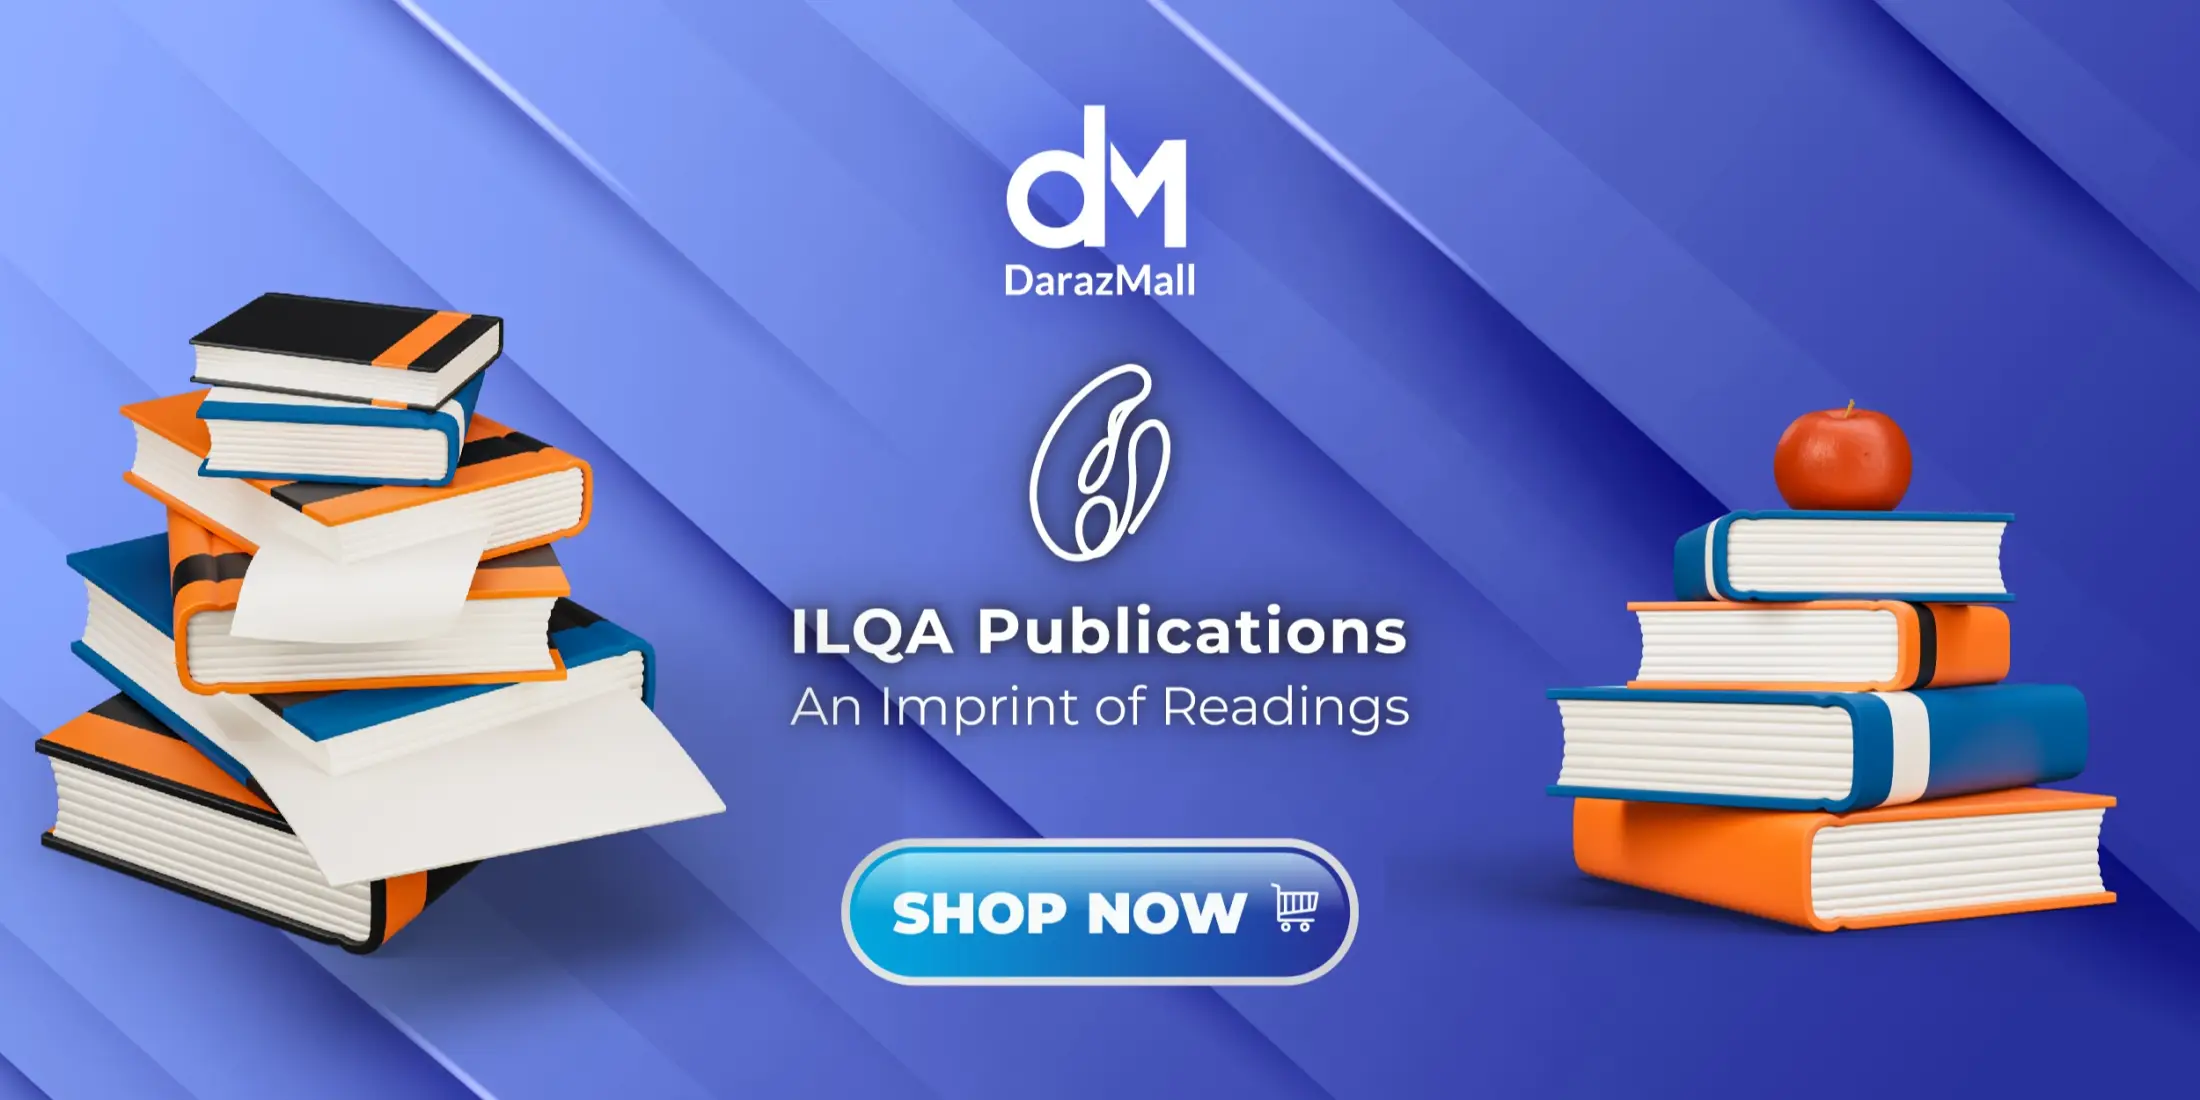 READINGS - Largest Online Books Resource in Pakistan